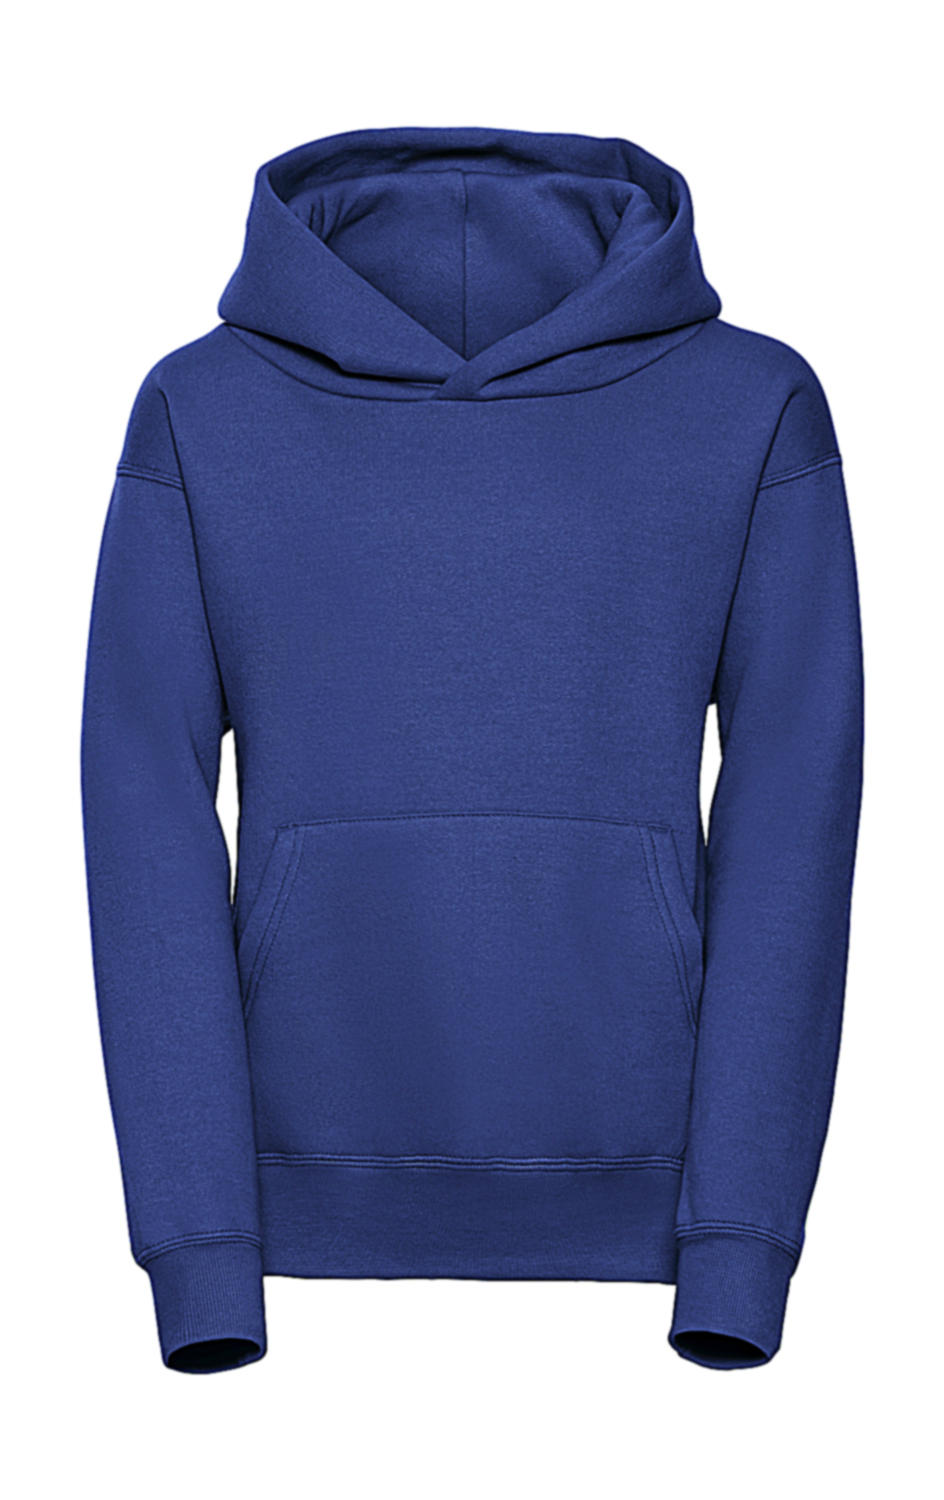  Kids Hooded Sweat in Farbe Bright Royal